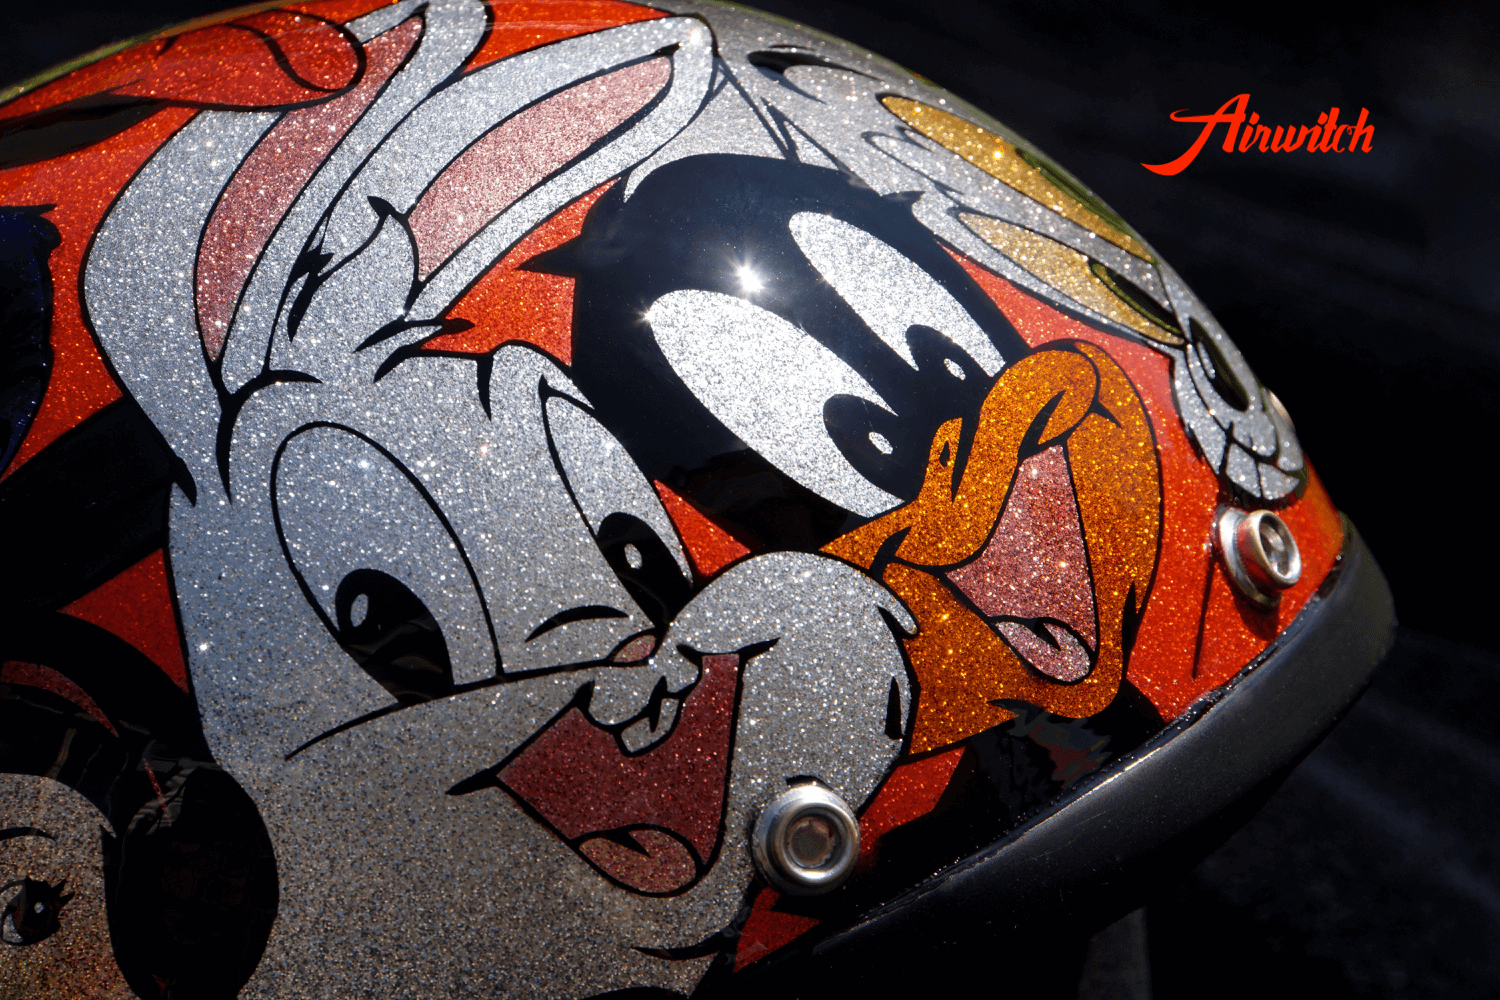 Helm mit Bugs Bunny Comic in Candyfarben auf Metal Flakes